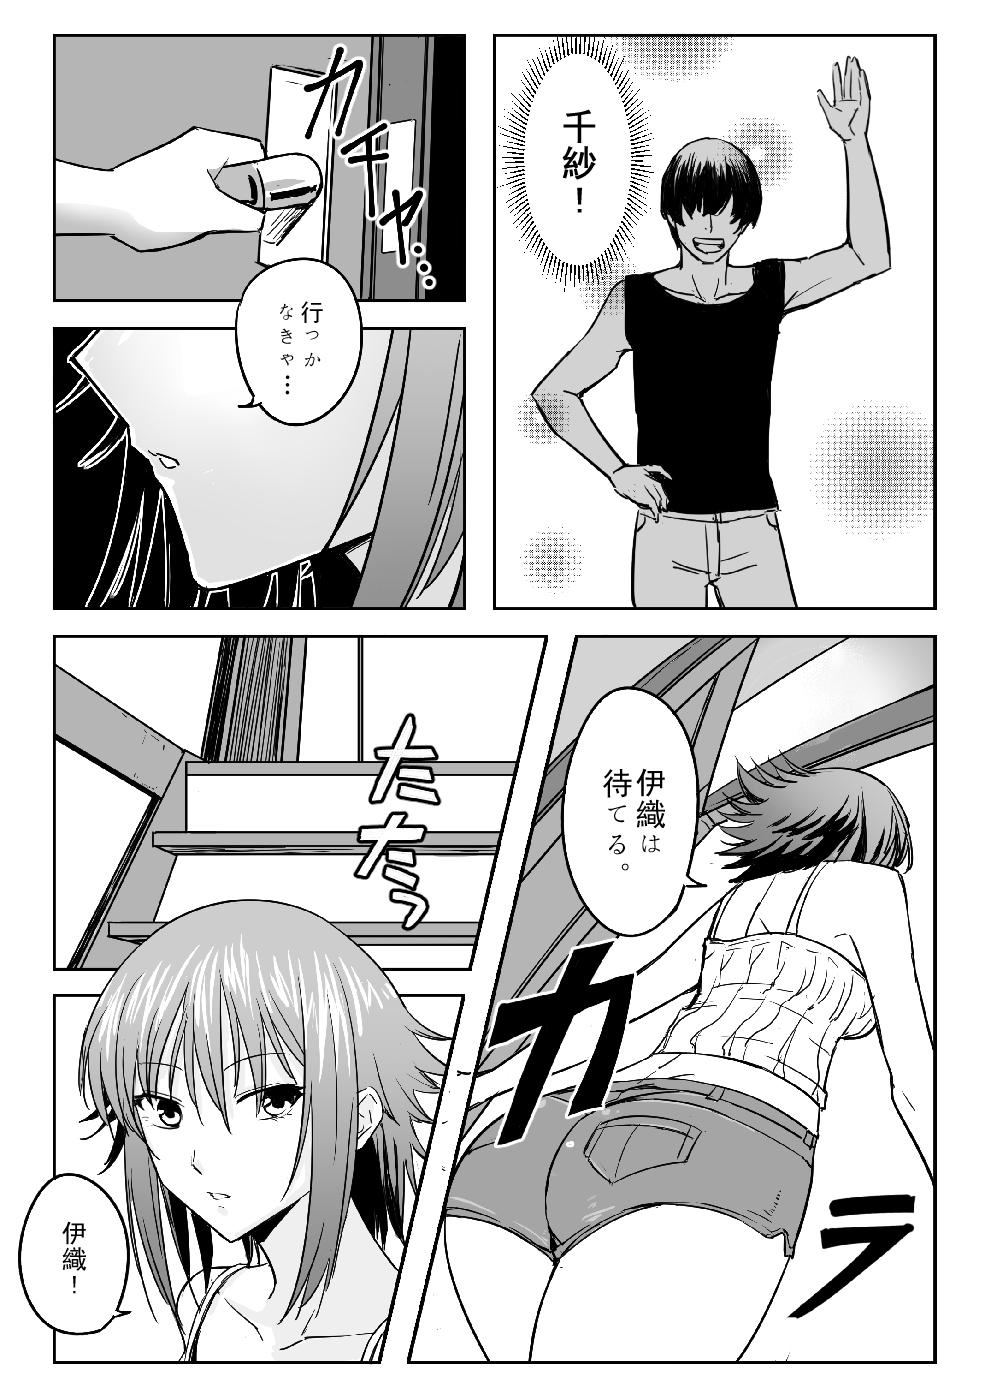 Gay Chika-chan is a goodbye! - Grand blue Room - Page 5